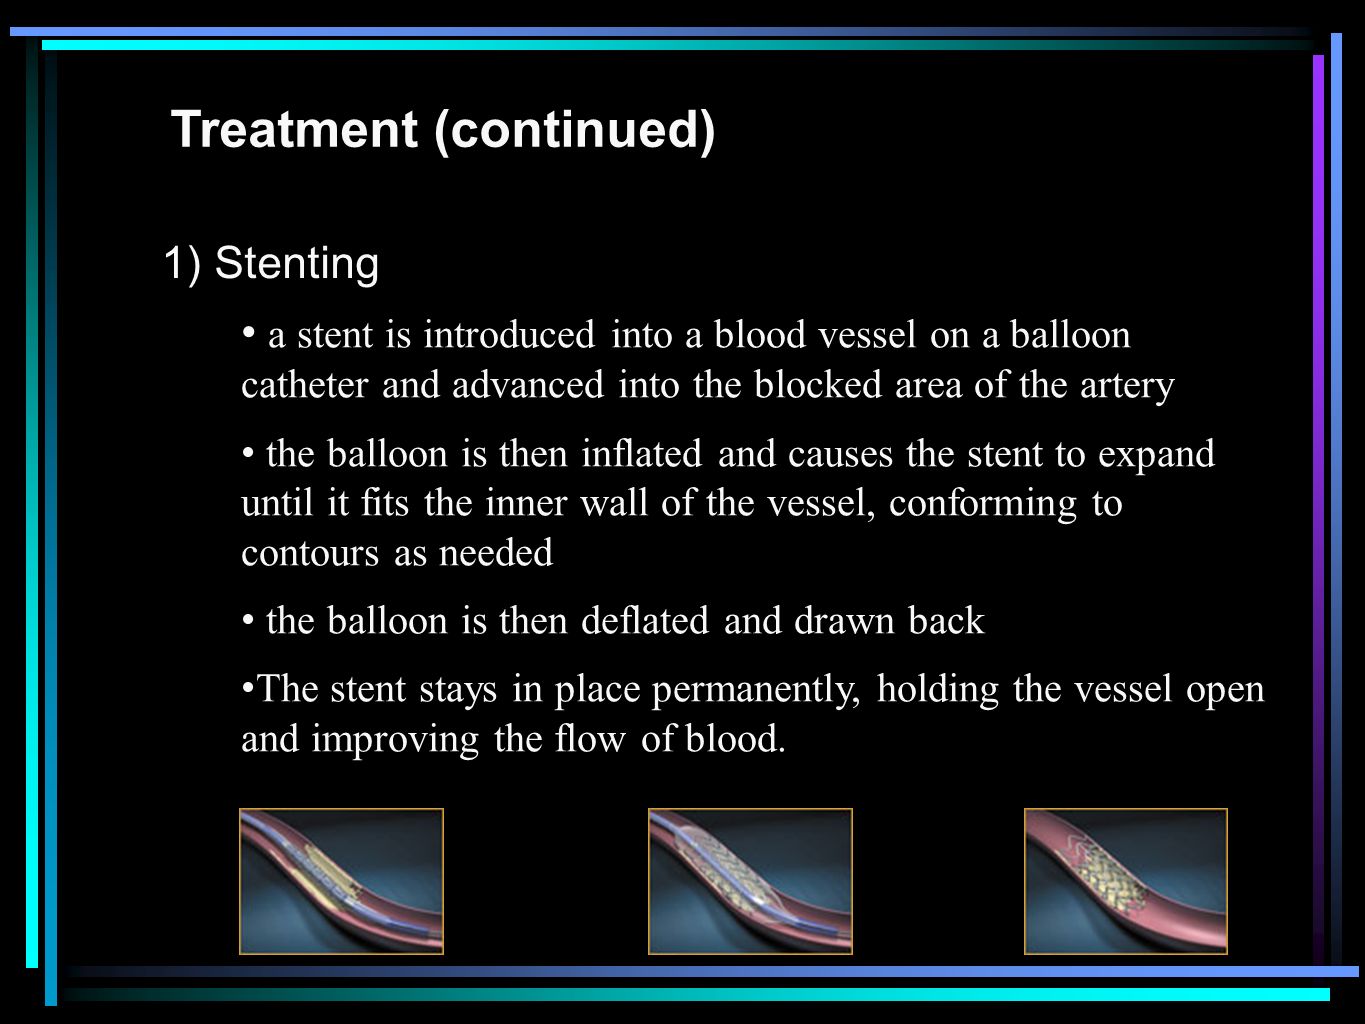 Treatment (continued) 1) Stenting a stent is introduced into a blood vessel on a balloon catheter and advanced into the blocked area of the artery the balloon is then inflated and causes the stent to expand until it fits the inner wall of the vessel, conforming to contours as needed the balloon is then deflated and drawn back The stent stays in place permanently, holding the vessel open and improving the flow of blood.